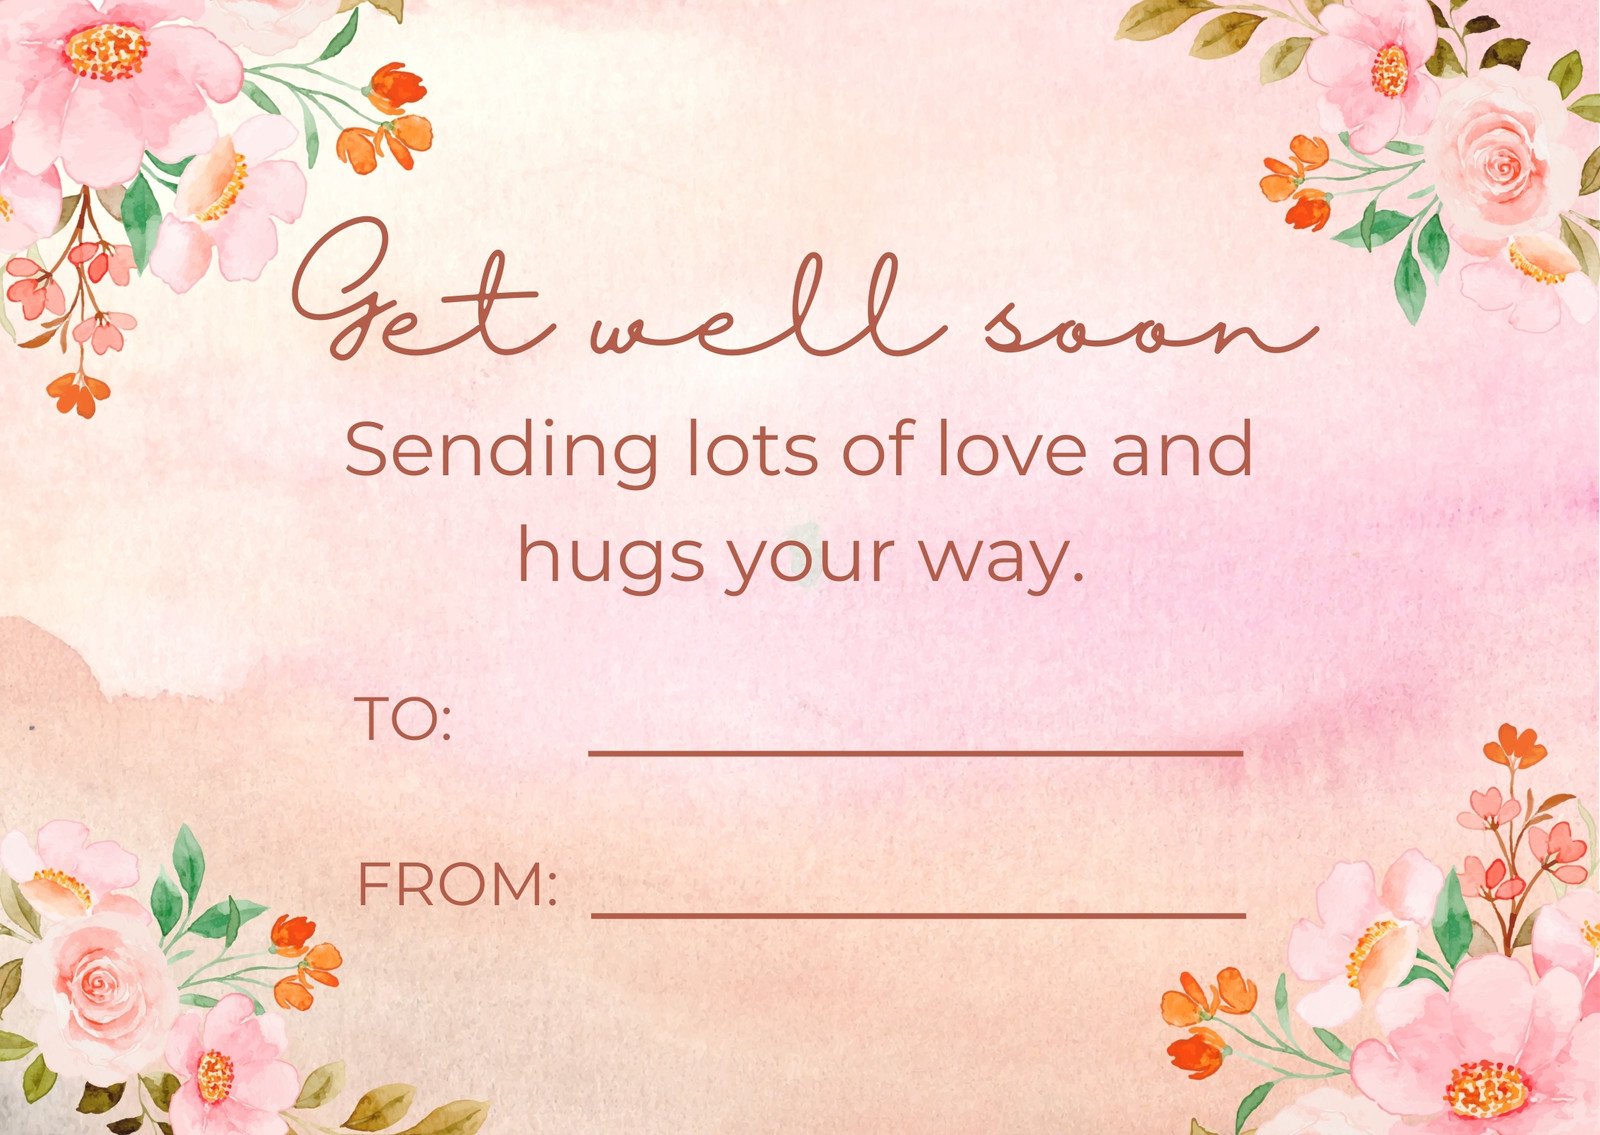 Printable Get Well Soon Cards